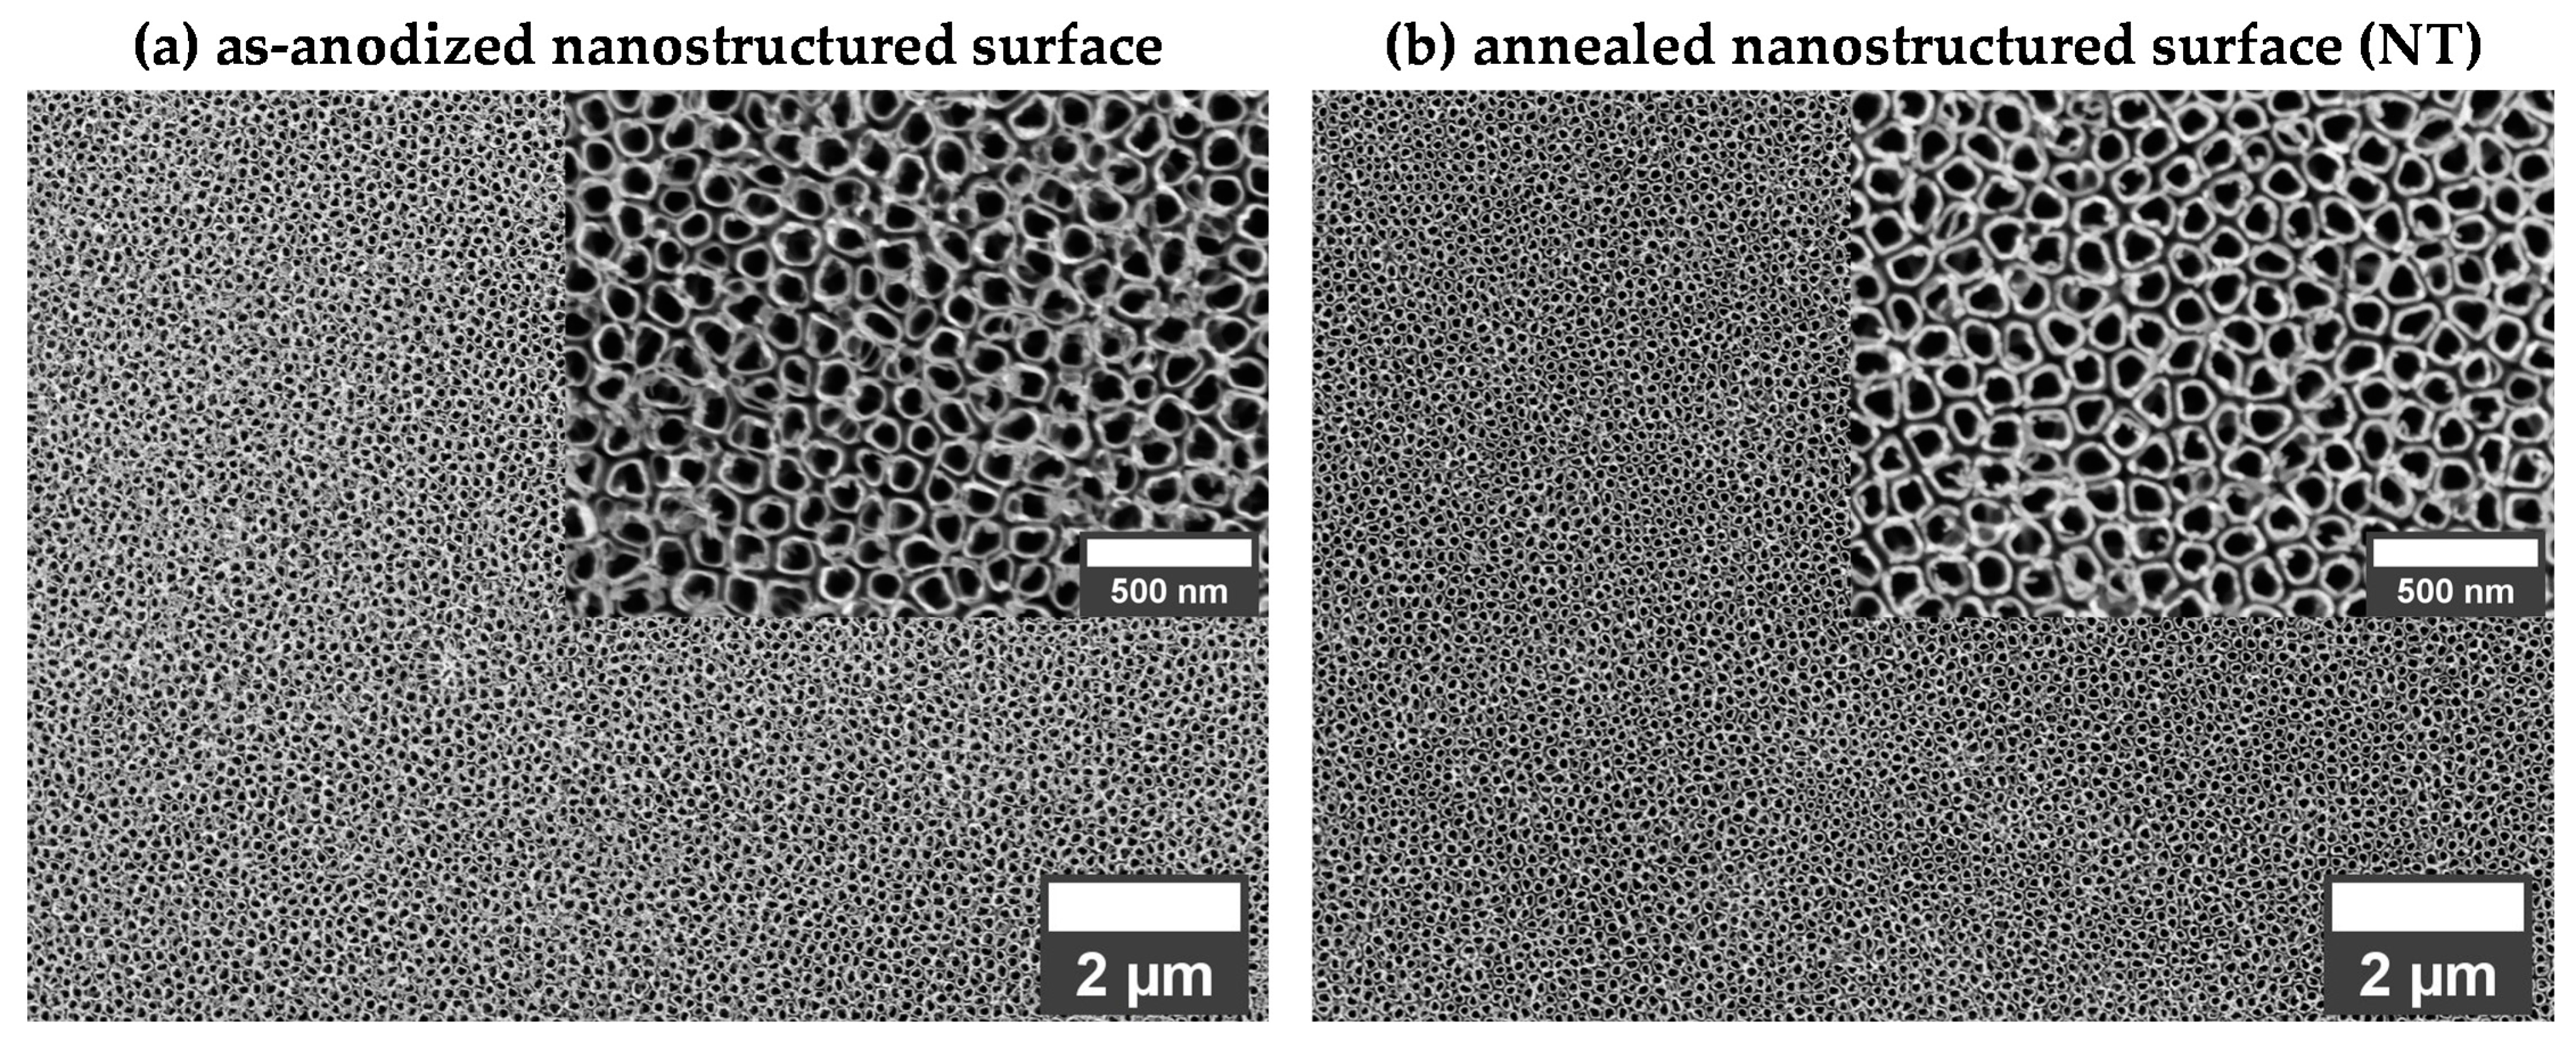 Coatings | Free Full-Text | Electrochemical Surface Biofunctionalization of  Titanium through Growth of TiO2 Nanotubes and Deposition of Zn Doped  Hydroxyapatite | HTML